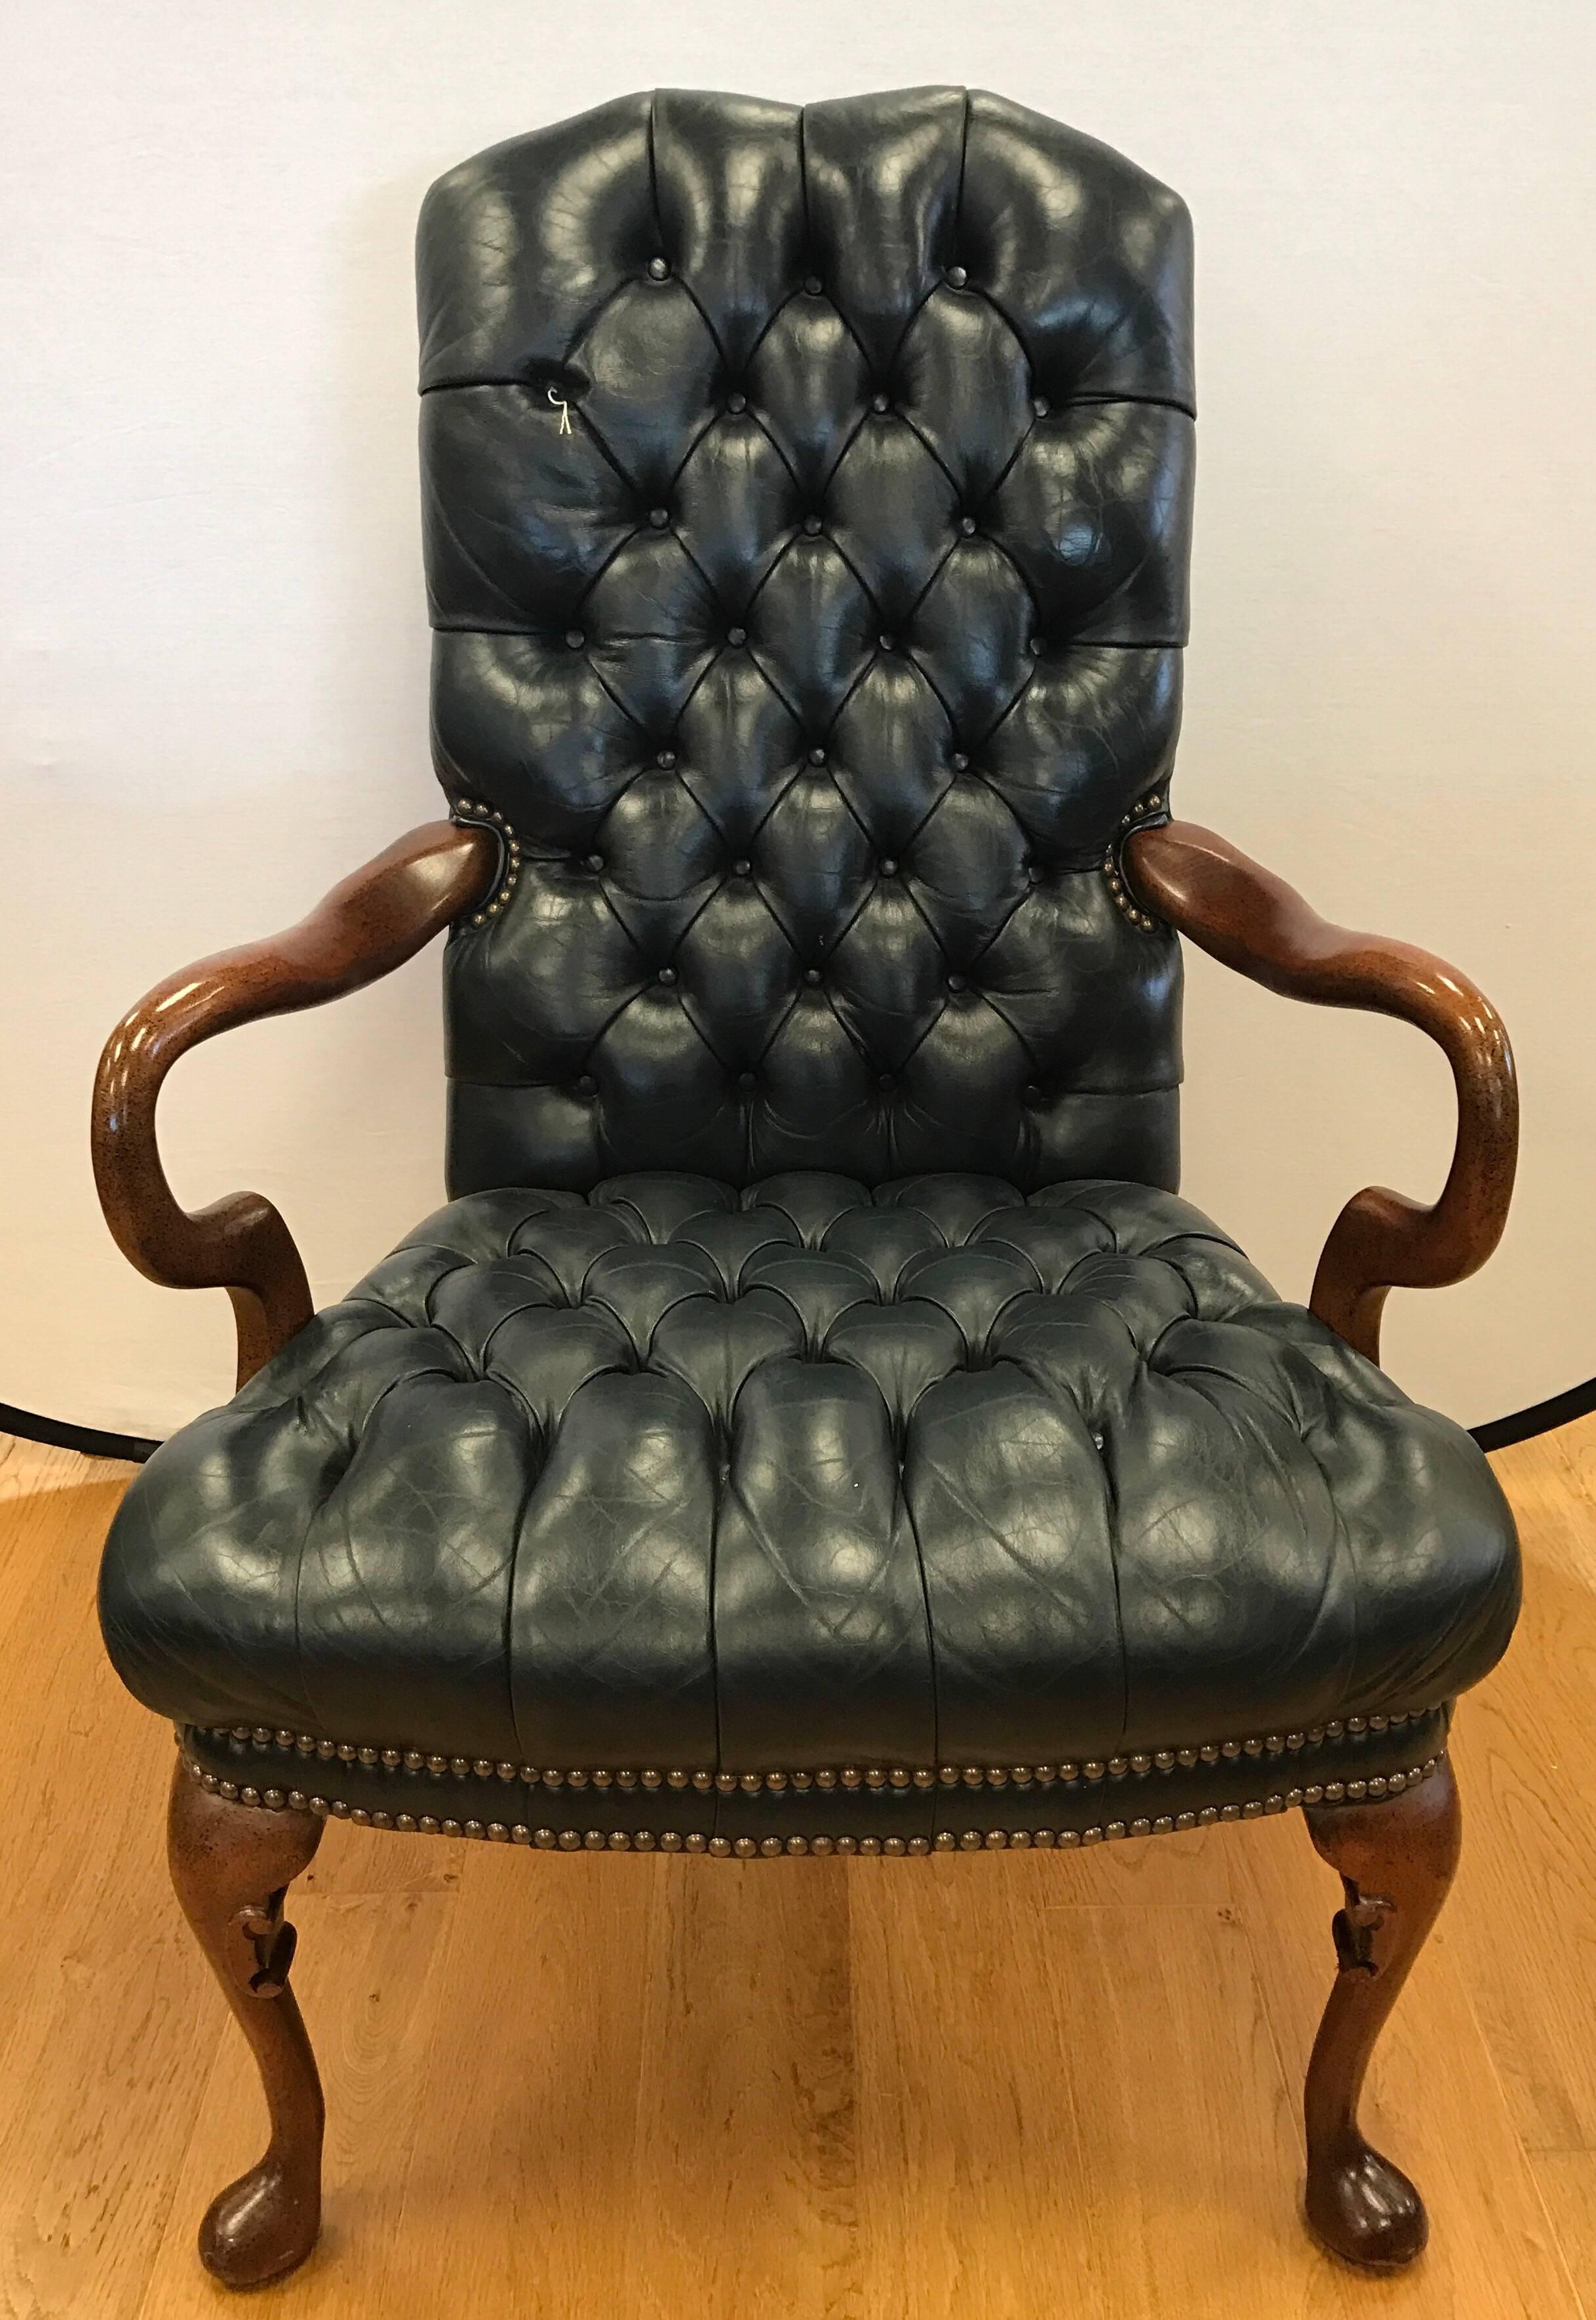 Pair of leather armchairs featuring Classic Chesterfield style tufted seating surface upholstered in a rich navy leather with brass nailhead trim accents.